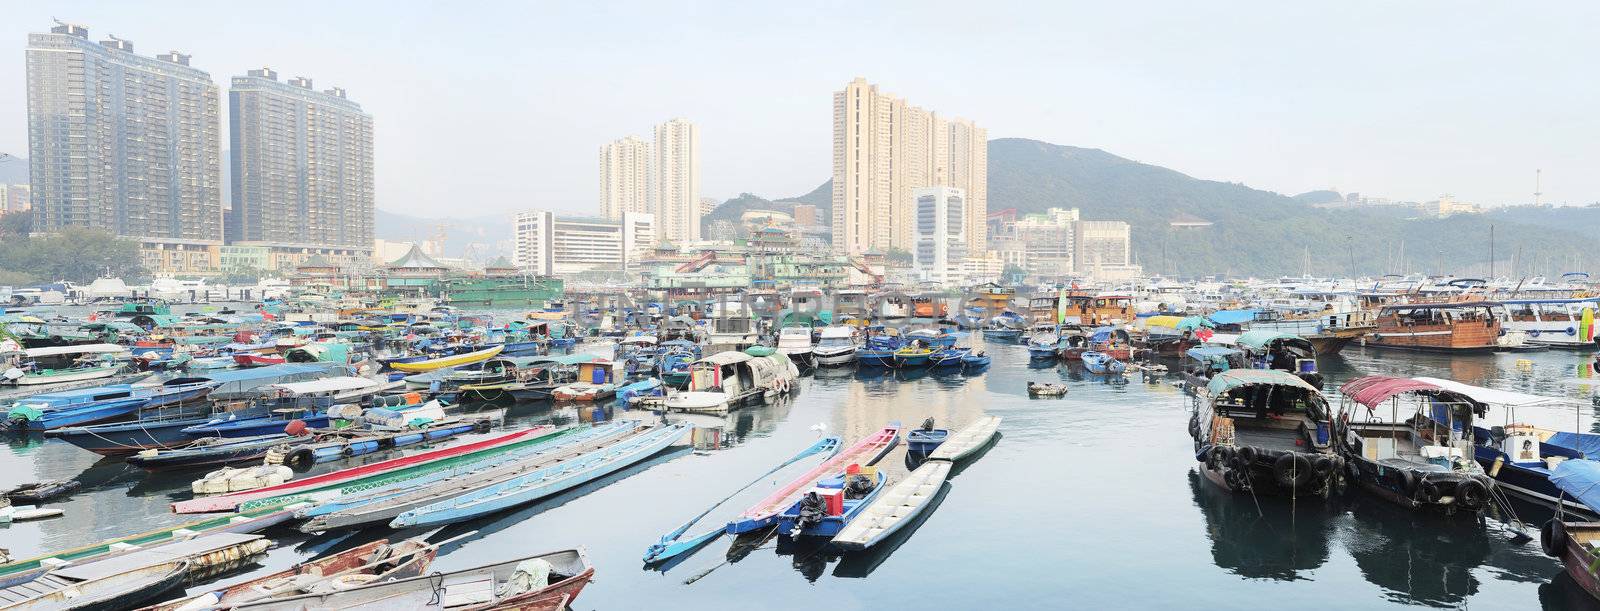 Aberdeen is famous to tourists for its floating village and floating seafood restaurants. Hong Kong